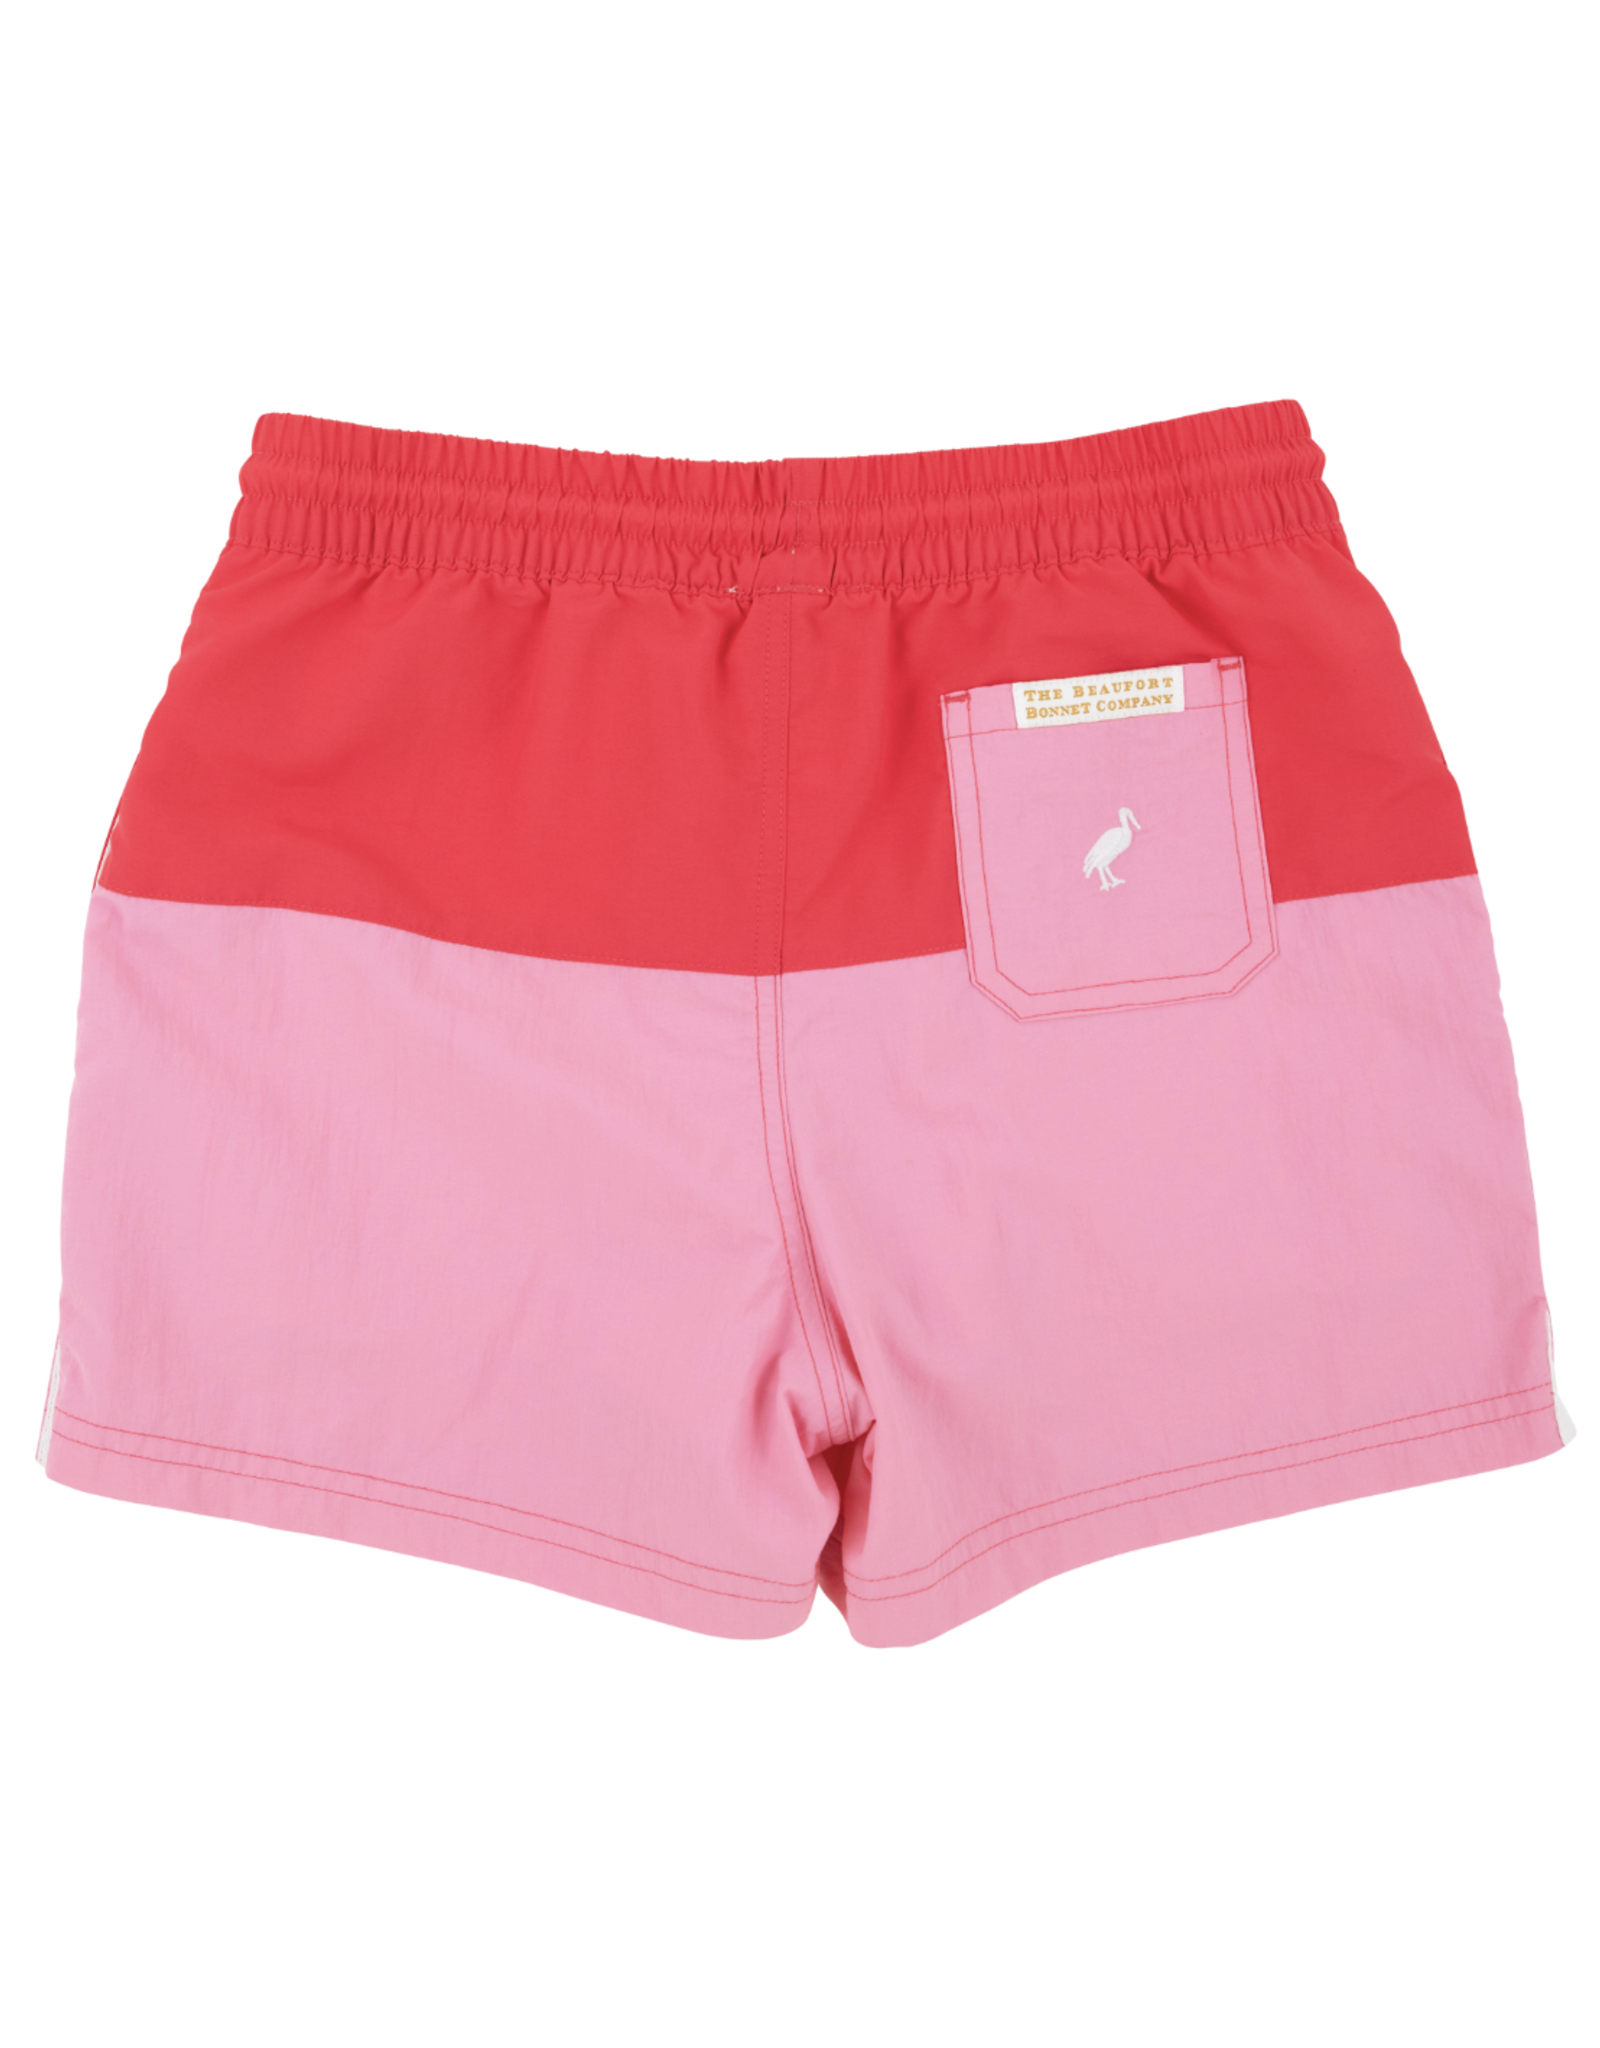 TBBC Country Club Colorblock Trunk Red/Hot Pink